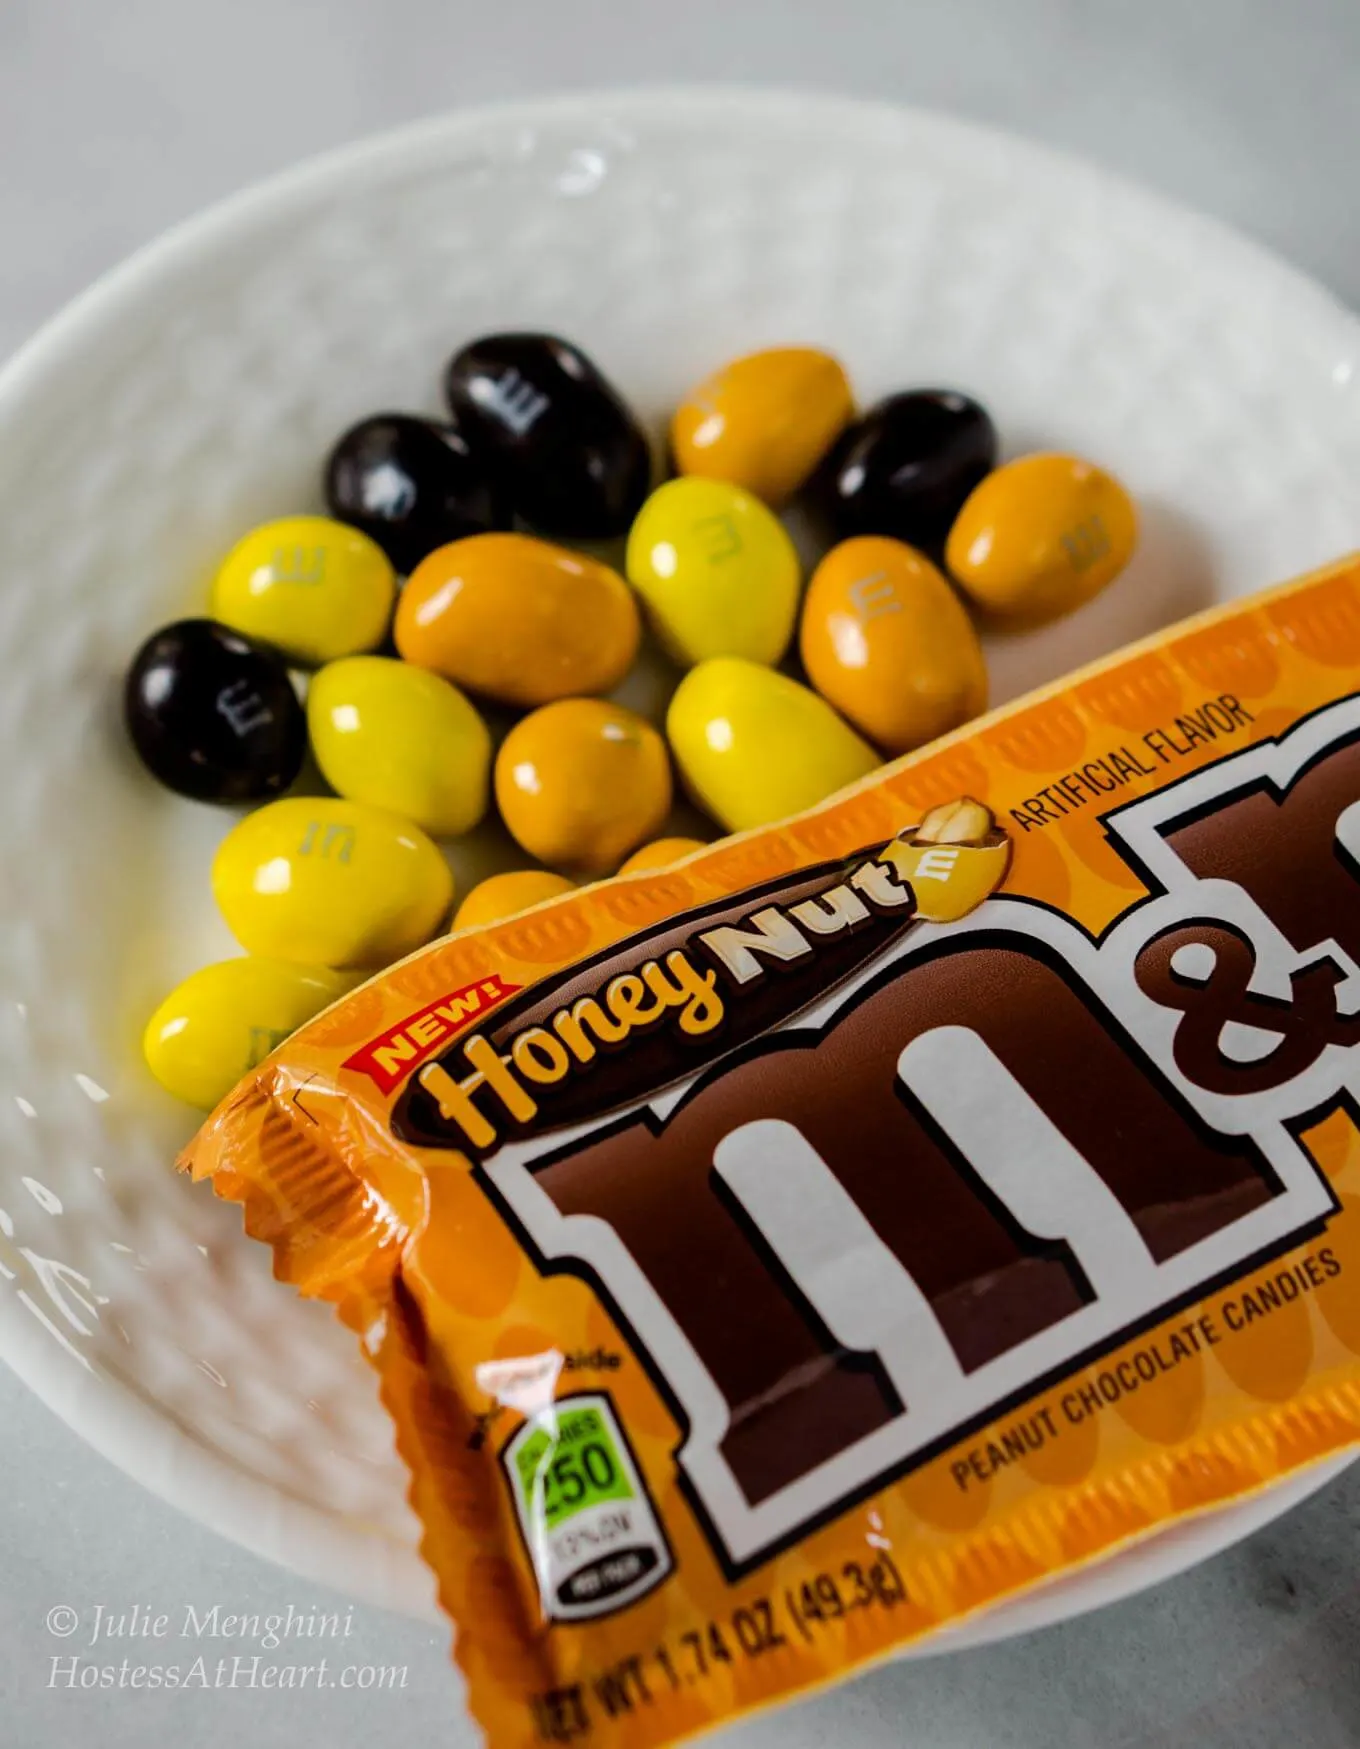 M&M's® Honey Nut Cookies taste like a big ole hug. They are warm from the fresh honey and the delicious flavor of the M&M's® Honey Nut candy gives these cookies a sweet nutty flavor | HostessAtHeart.com